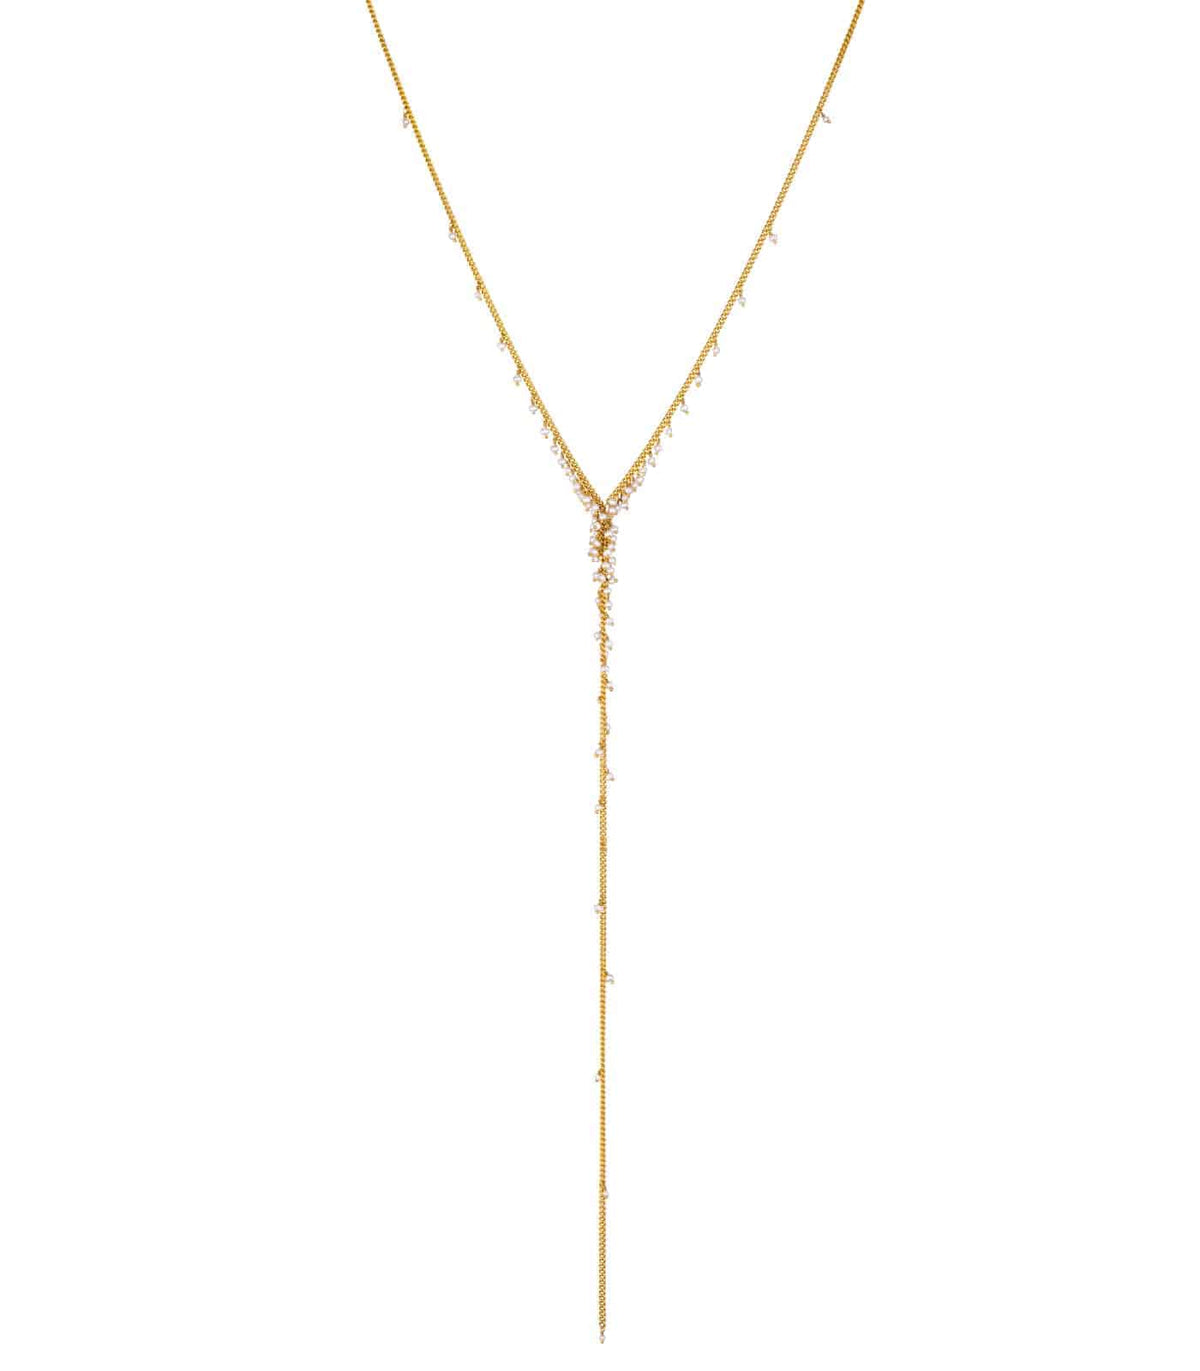 dewdrop lariat necklace with pearls in gold vermeil